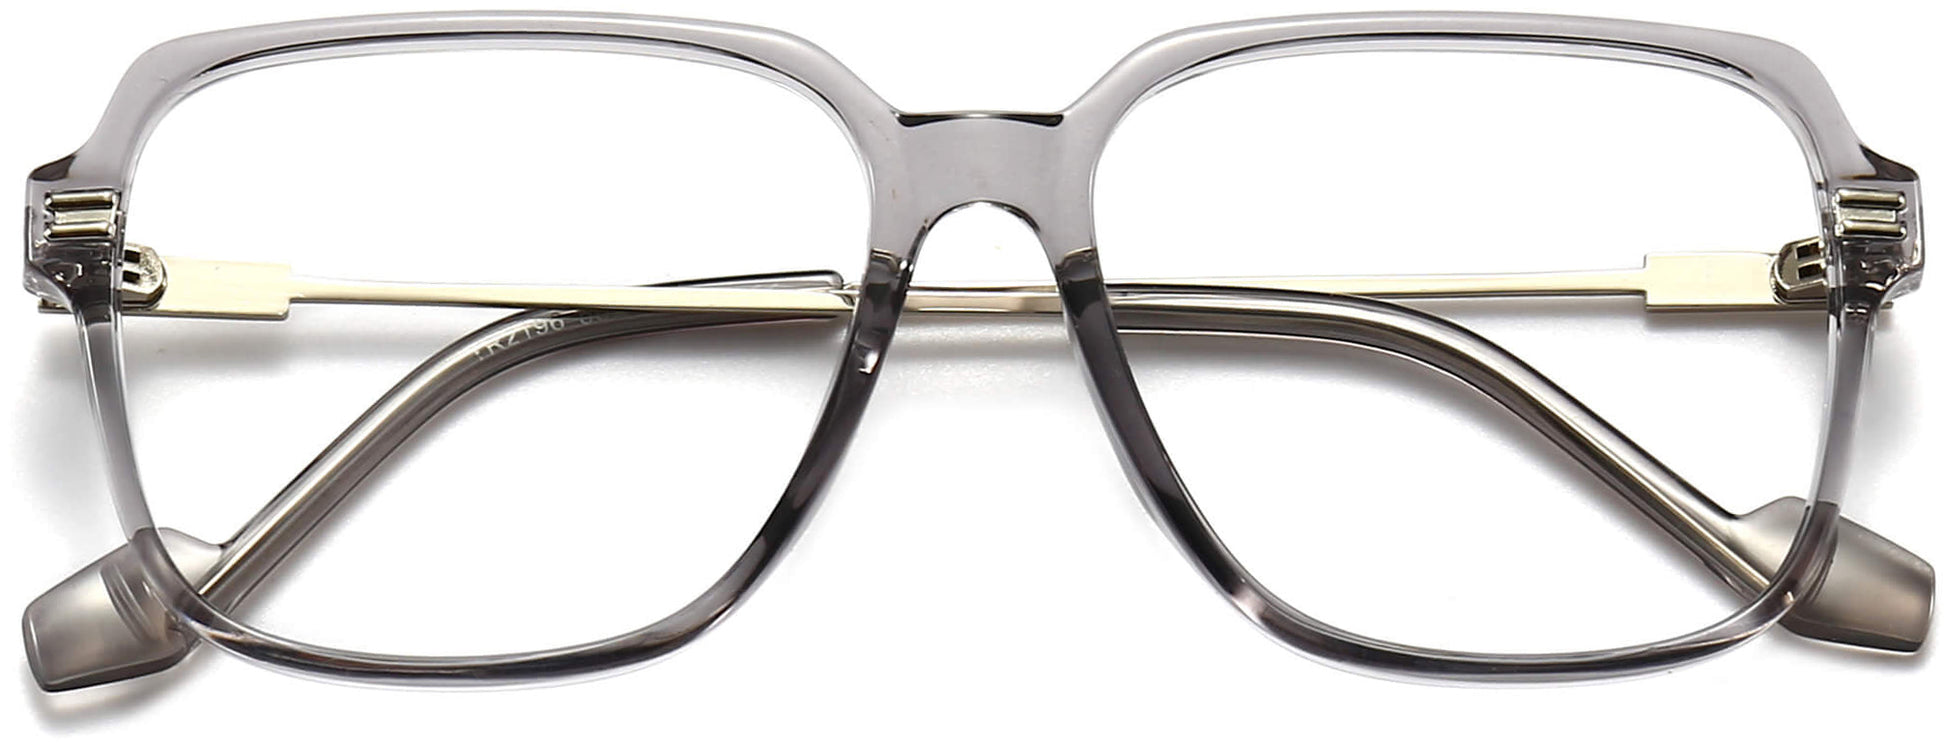 Brixton Square Gray Eyeglasses from ANRRI, closed view